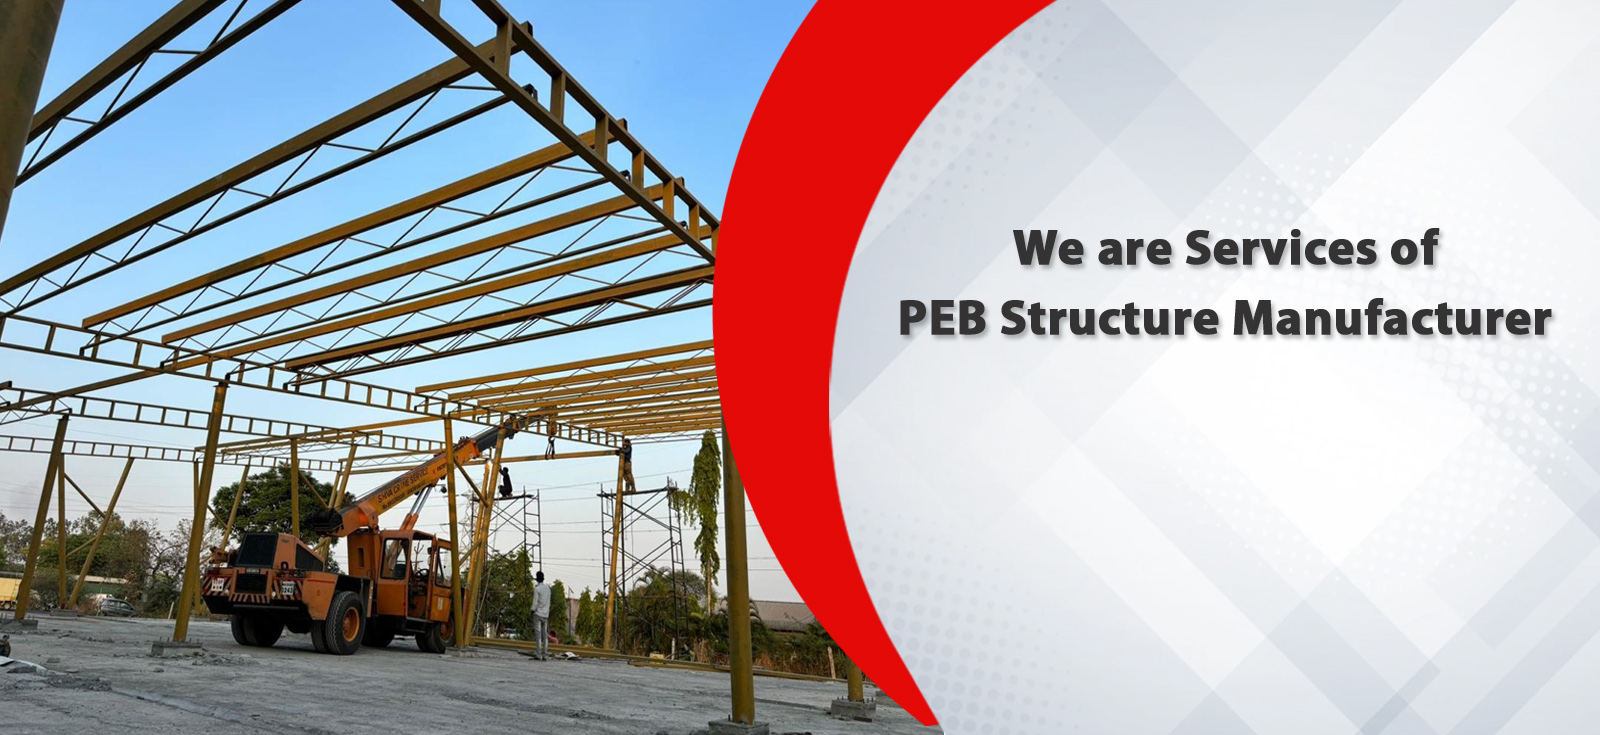 We are Services of PEB Structure Manufacturer